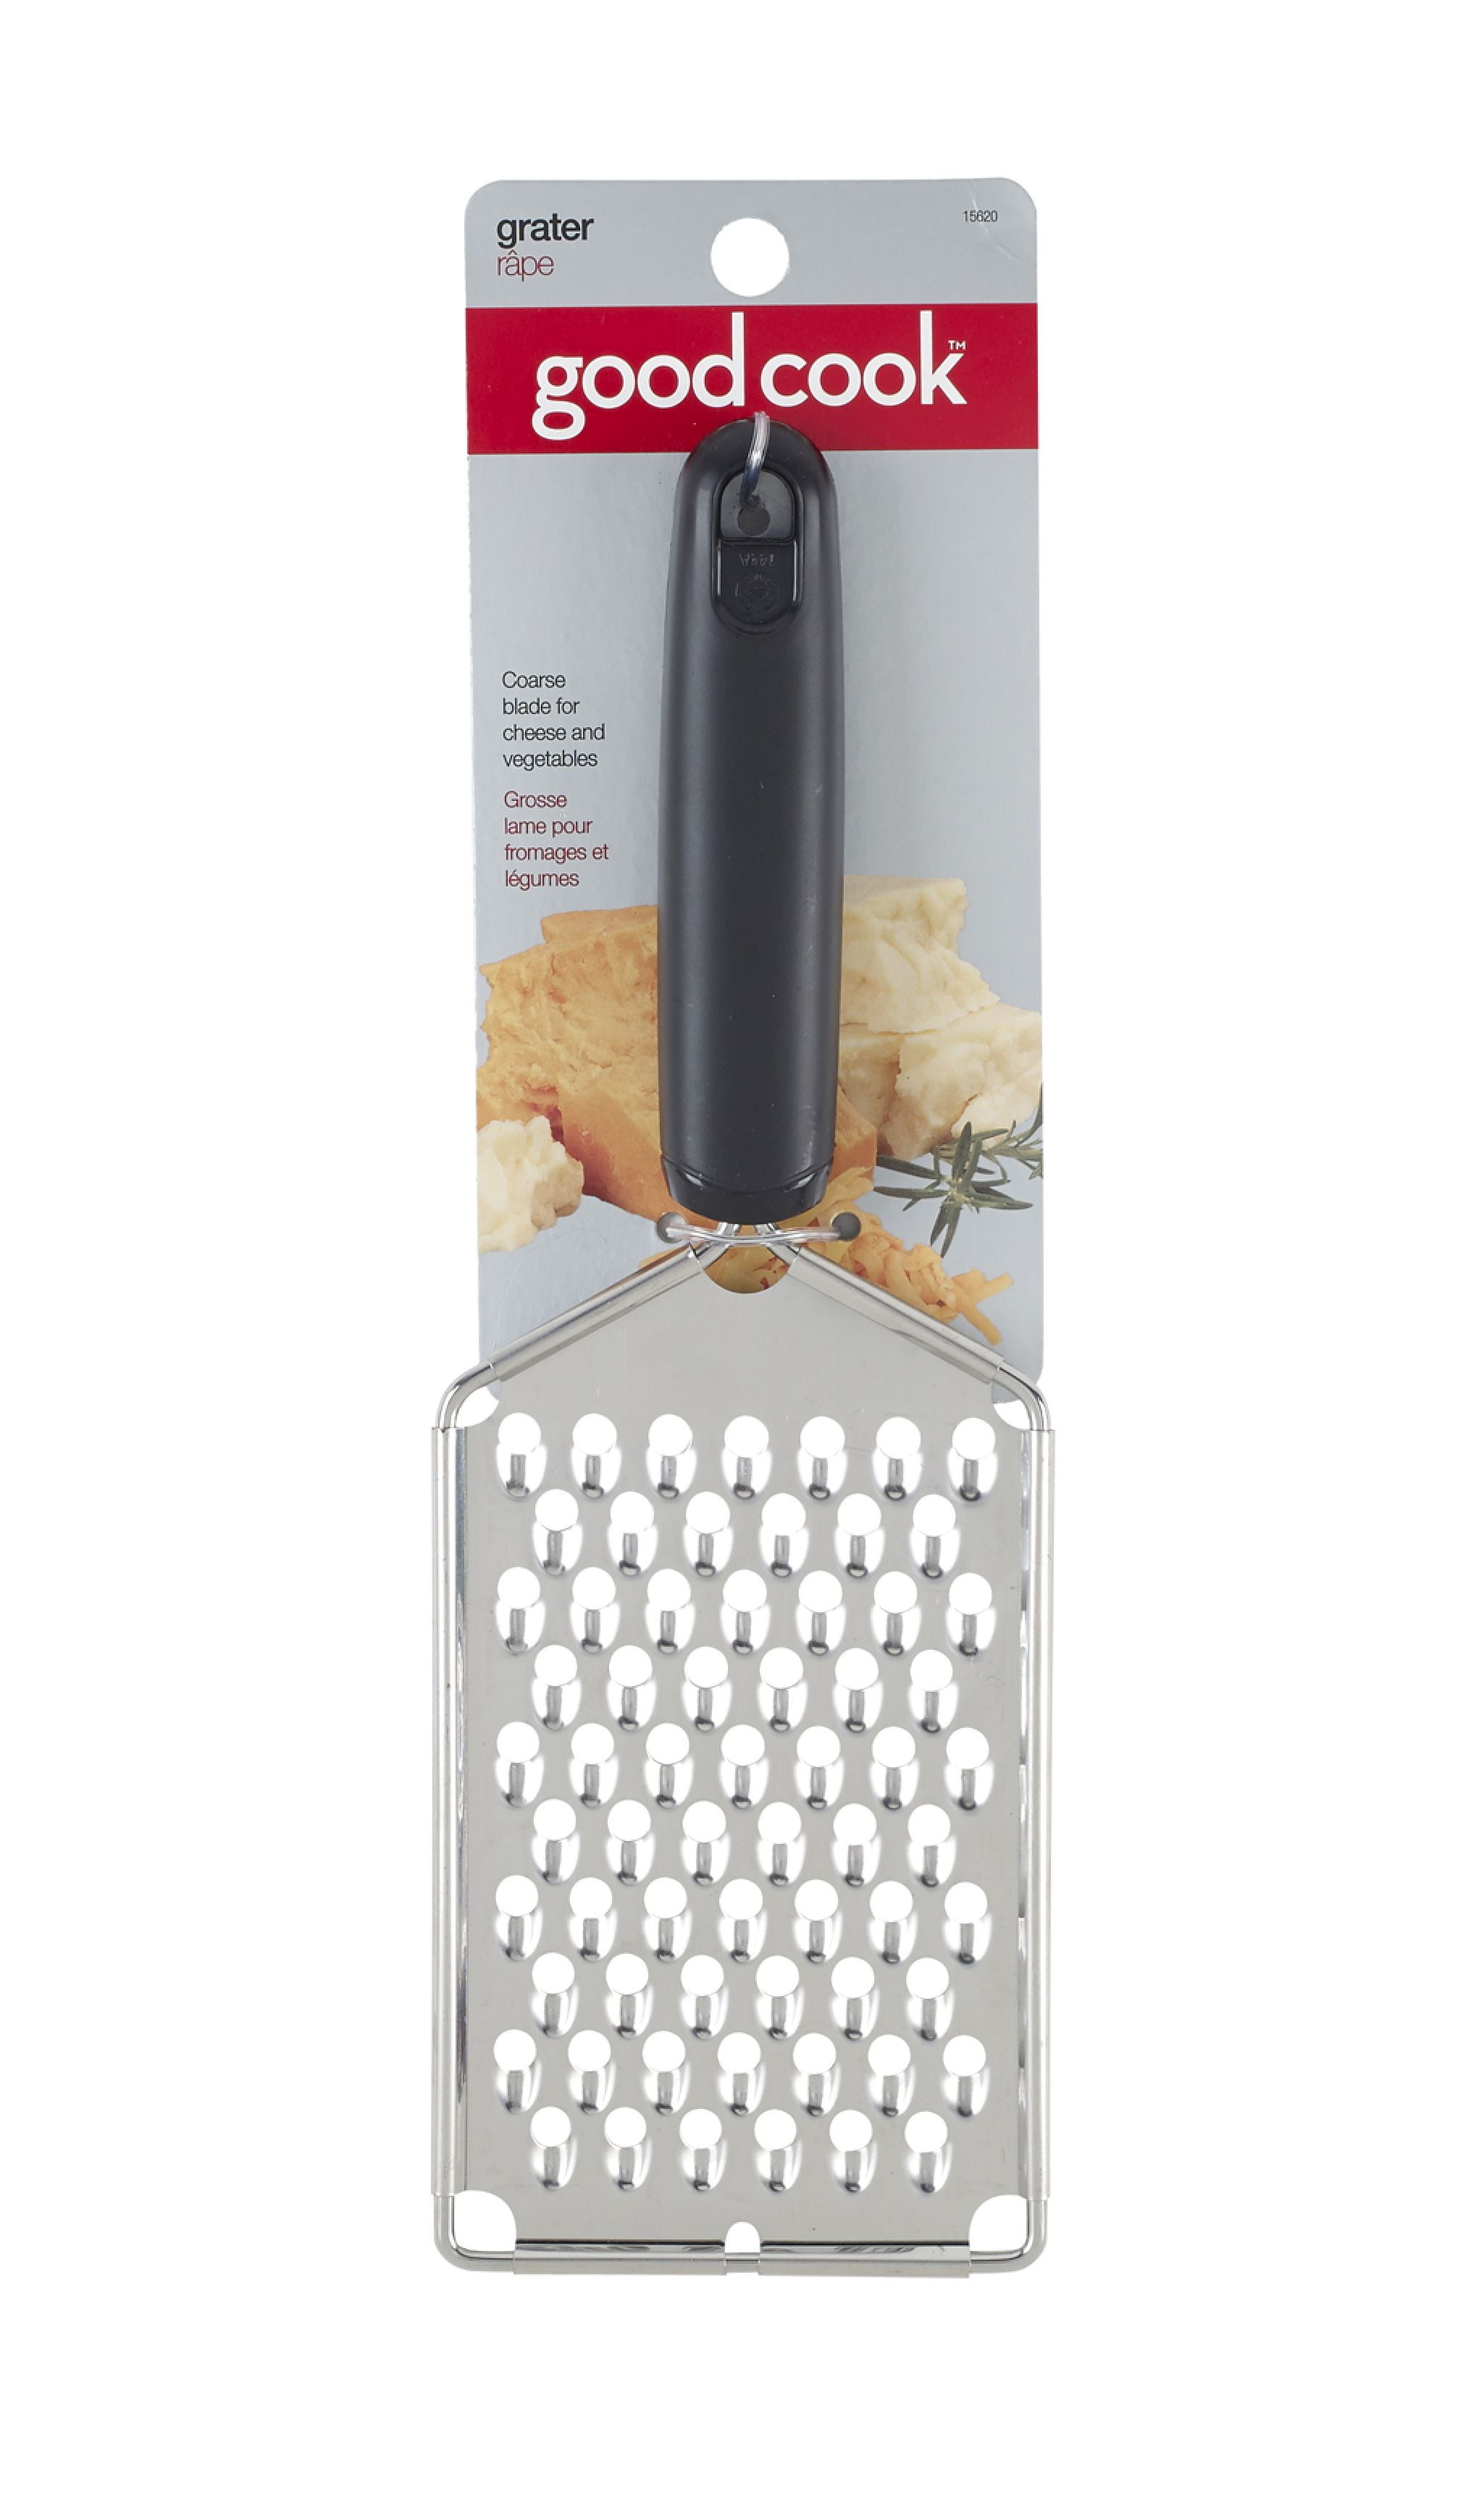 Easy Butter Grater Spreadable Butter Mill Kitchen Grater NEW Sell K9T3 